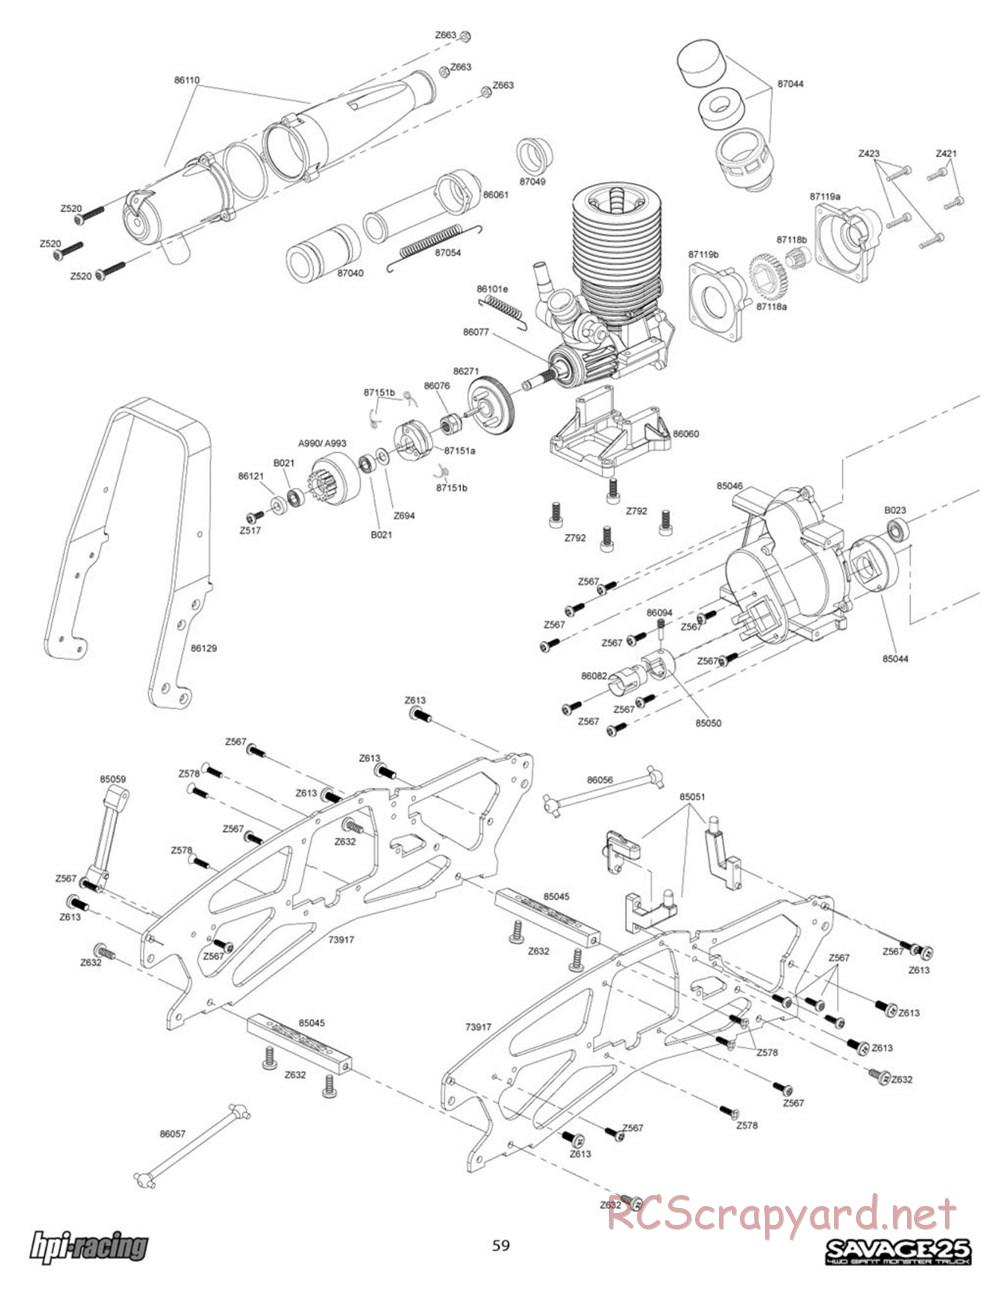 HPI - Savage 25 - Exploded View - Page 59